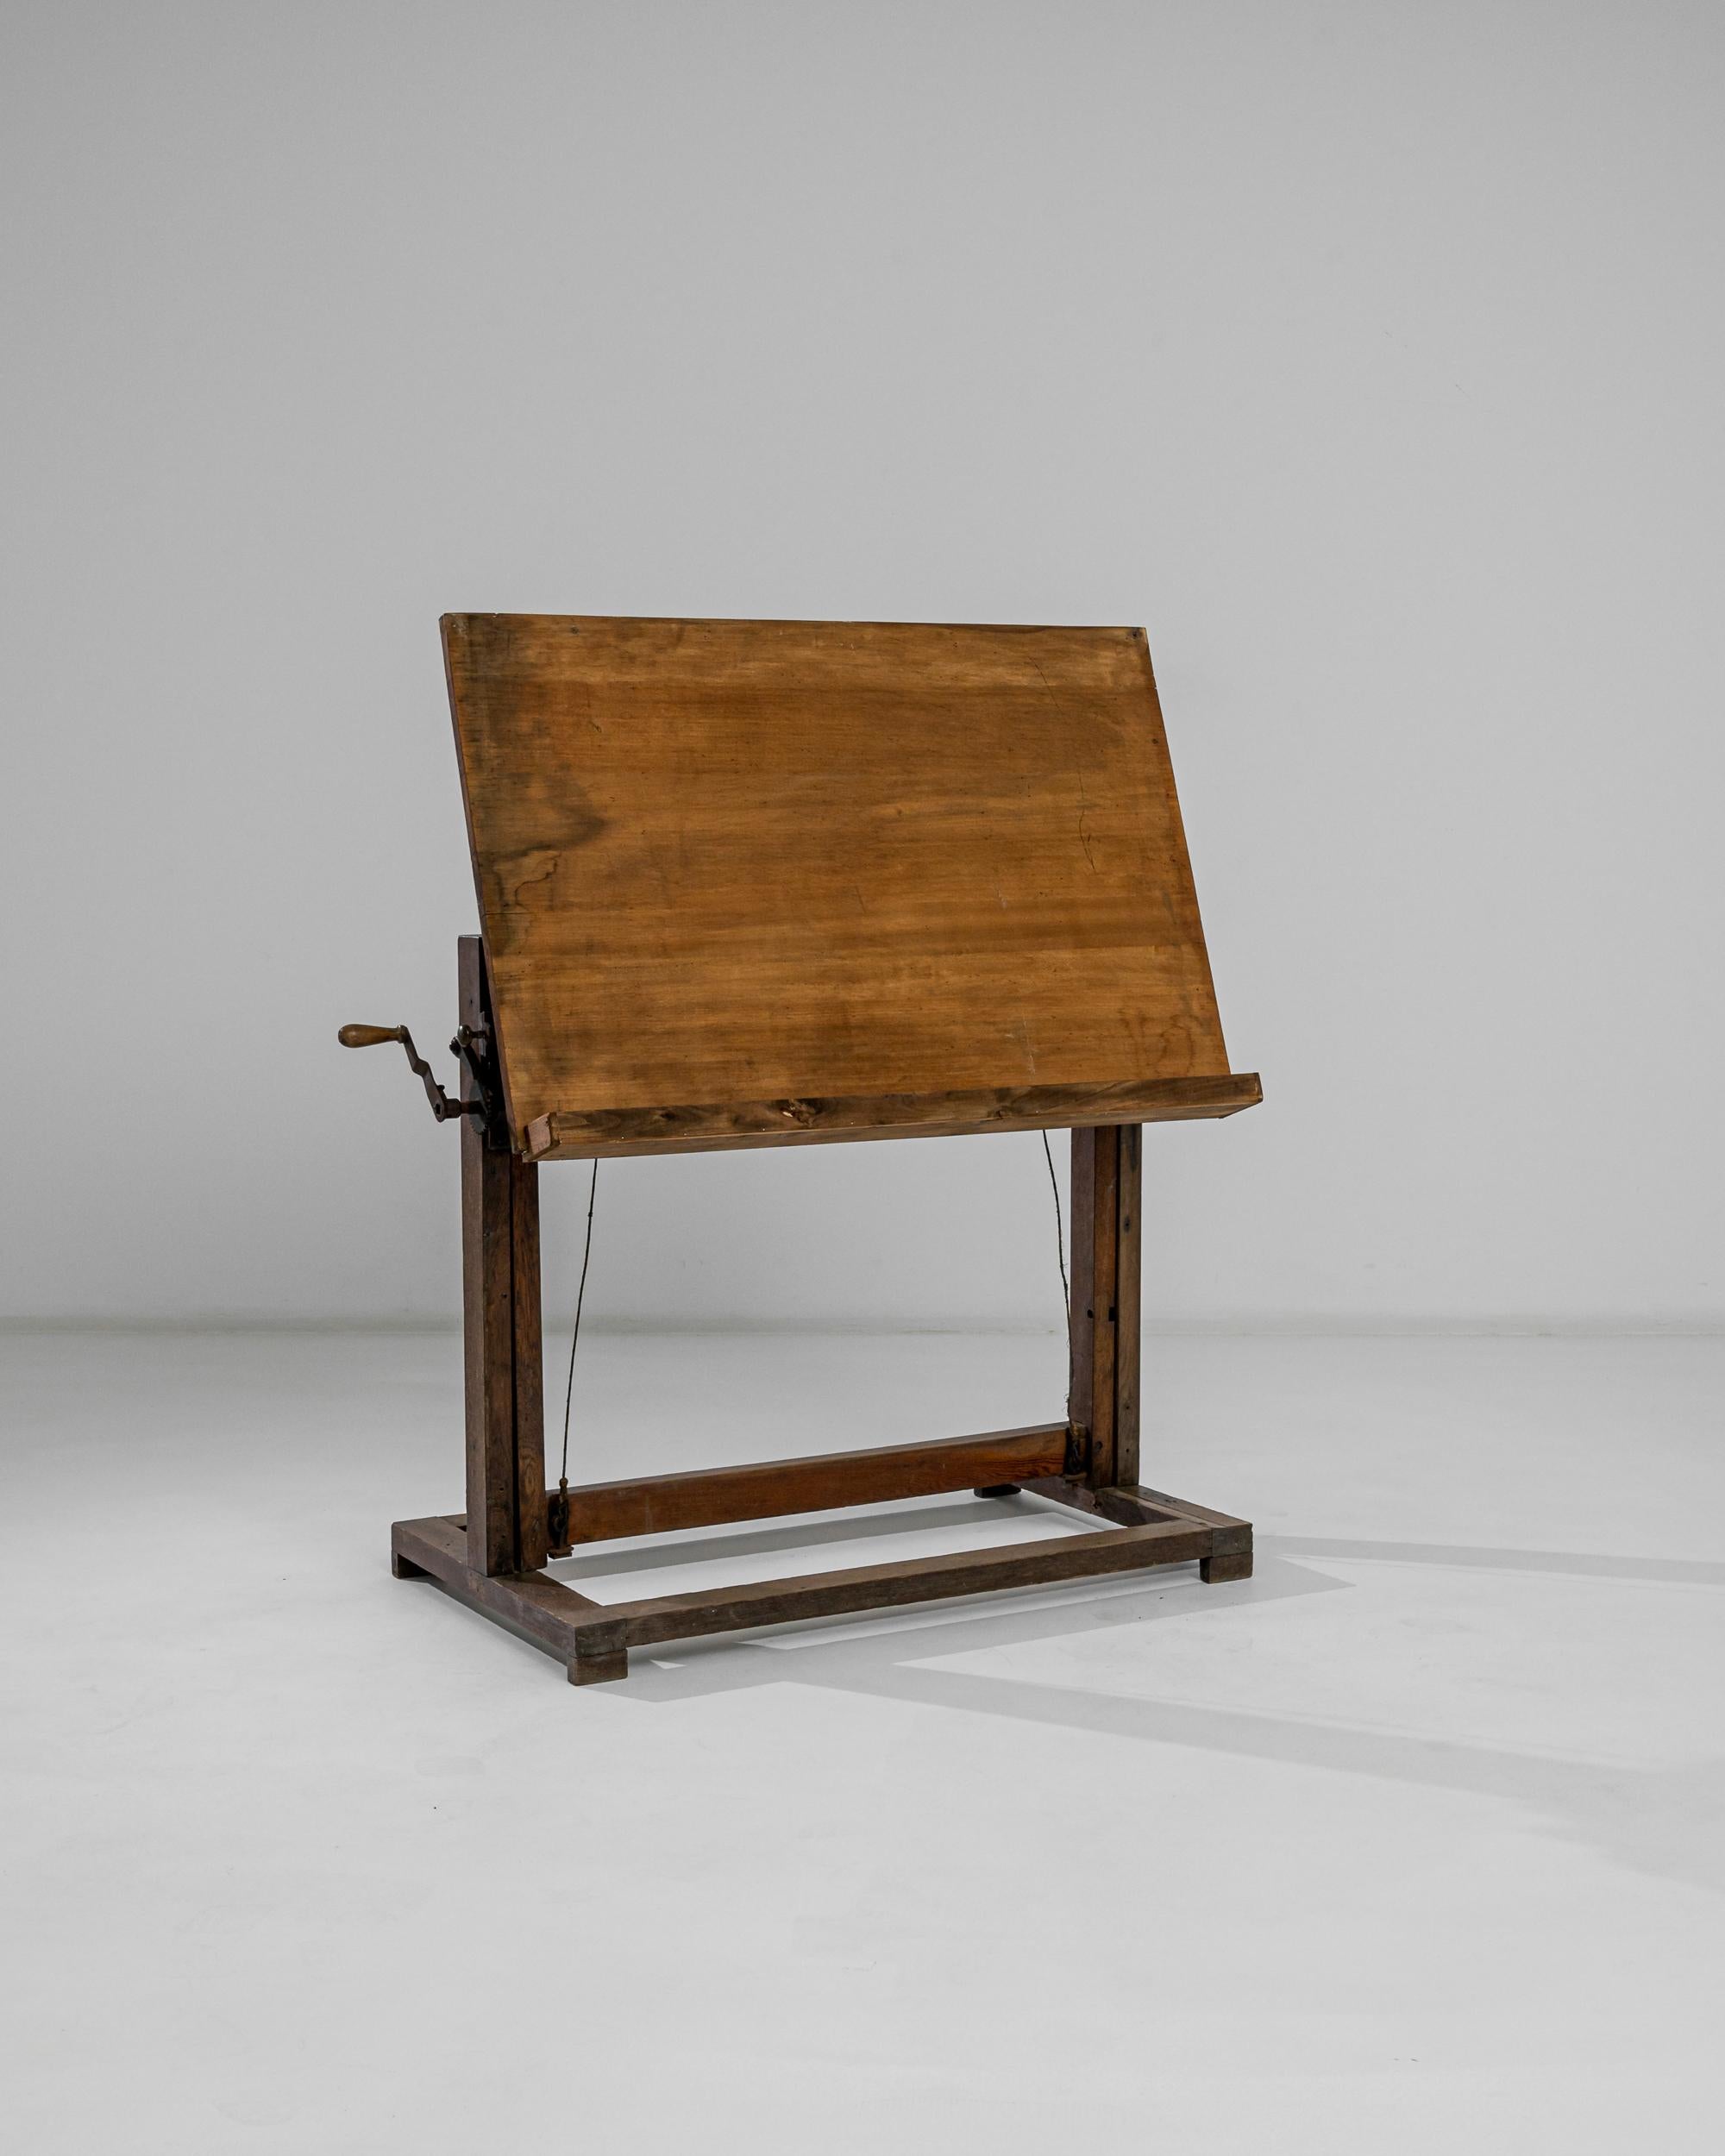 A wooden drawing table made in France circa 1920. This vintage drafting board features an adjustable drawing surface, which may be set at a variety of angles and heights with the help of a crankwheel mechanism. The rectangular shape of the feet